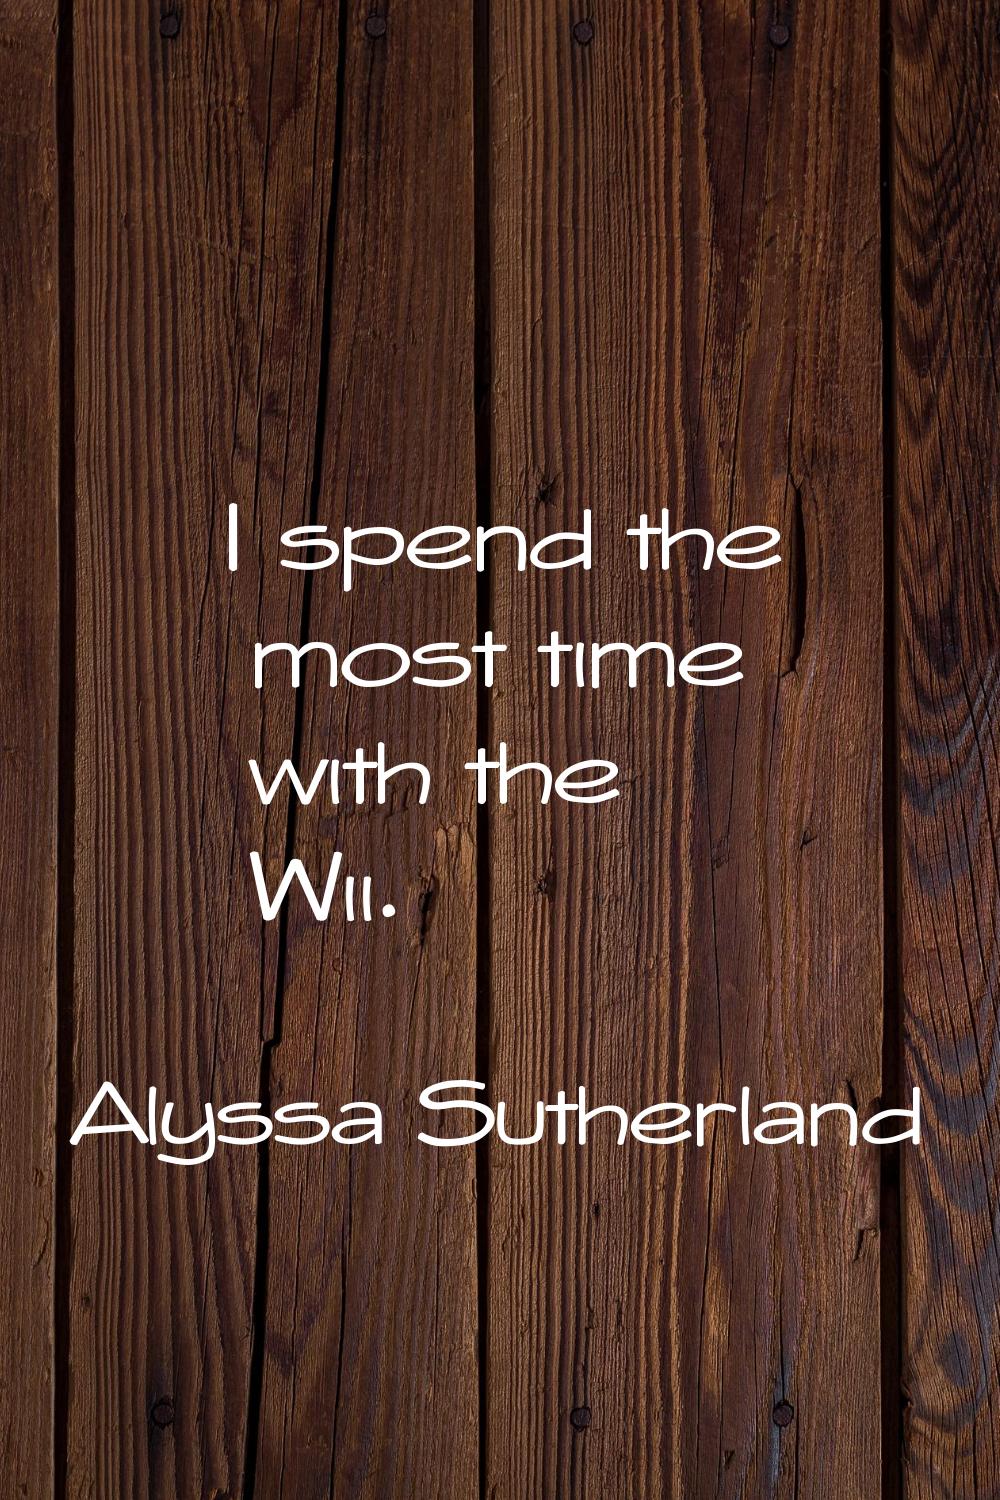 I spend the most time with the Wii.